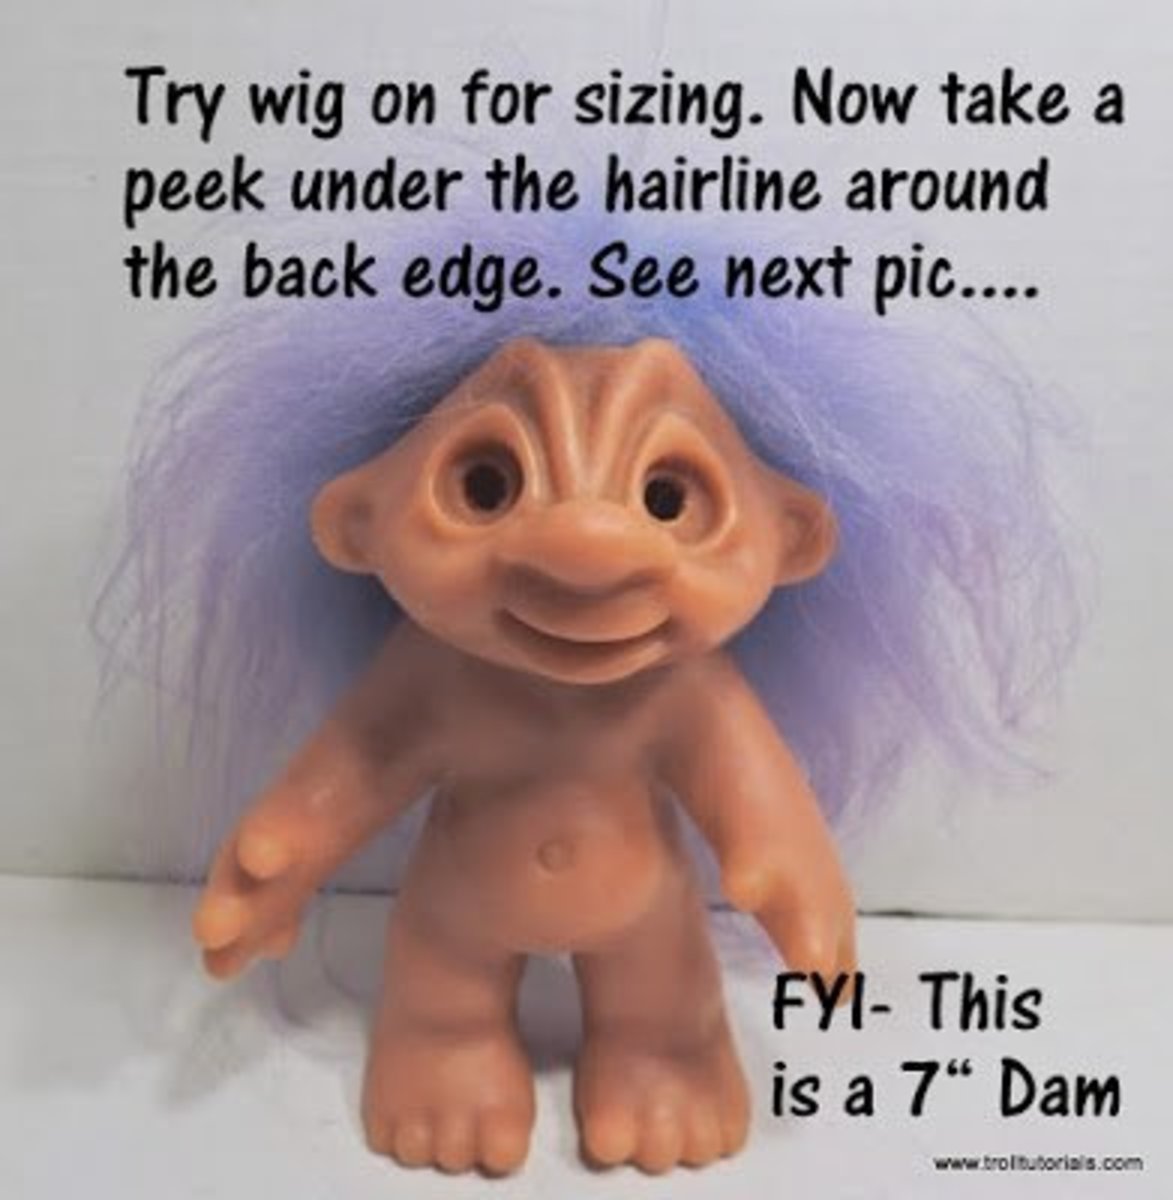 7. Now try the wig on your troll for sizing. You may notice that around the back edges it sticks out past the neck or goes too low down on the back. 